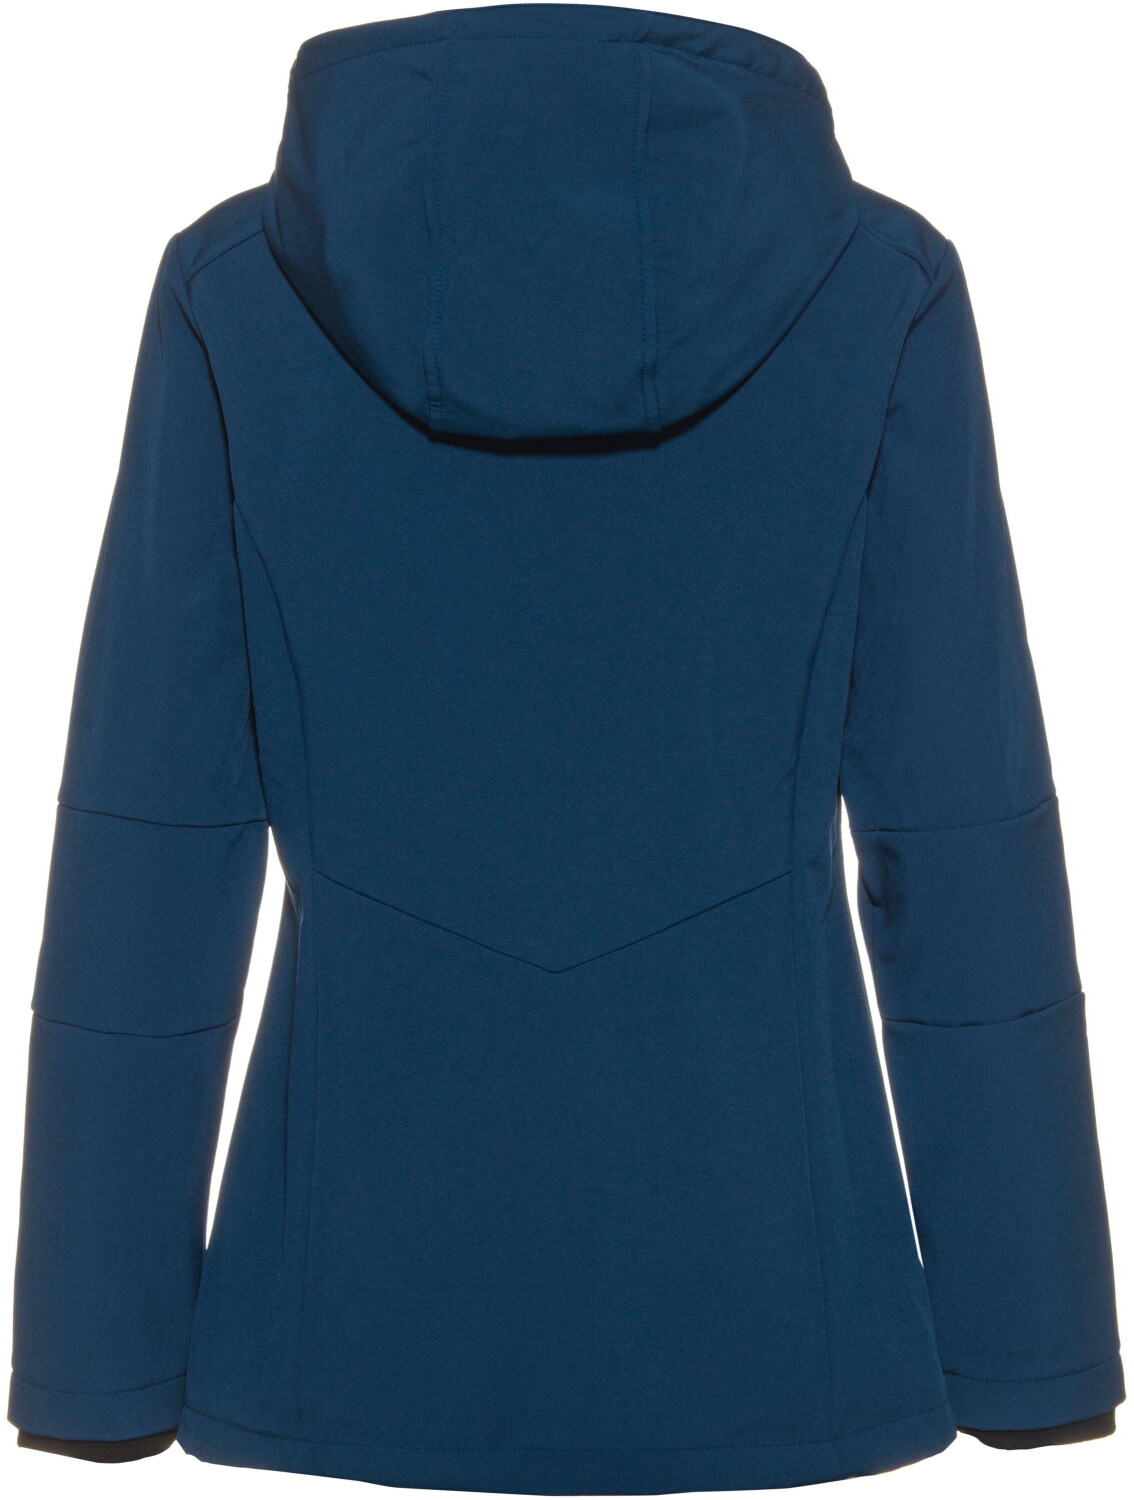 Comfortable bei Woman blue With blue 39,99 | ink/cristal Jacket Preisvergleich Softshell ab Fit Long (3A22226) CMP €